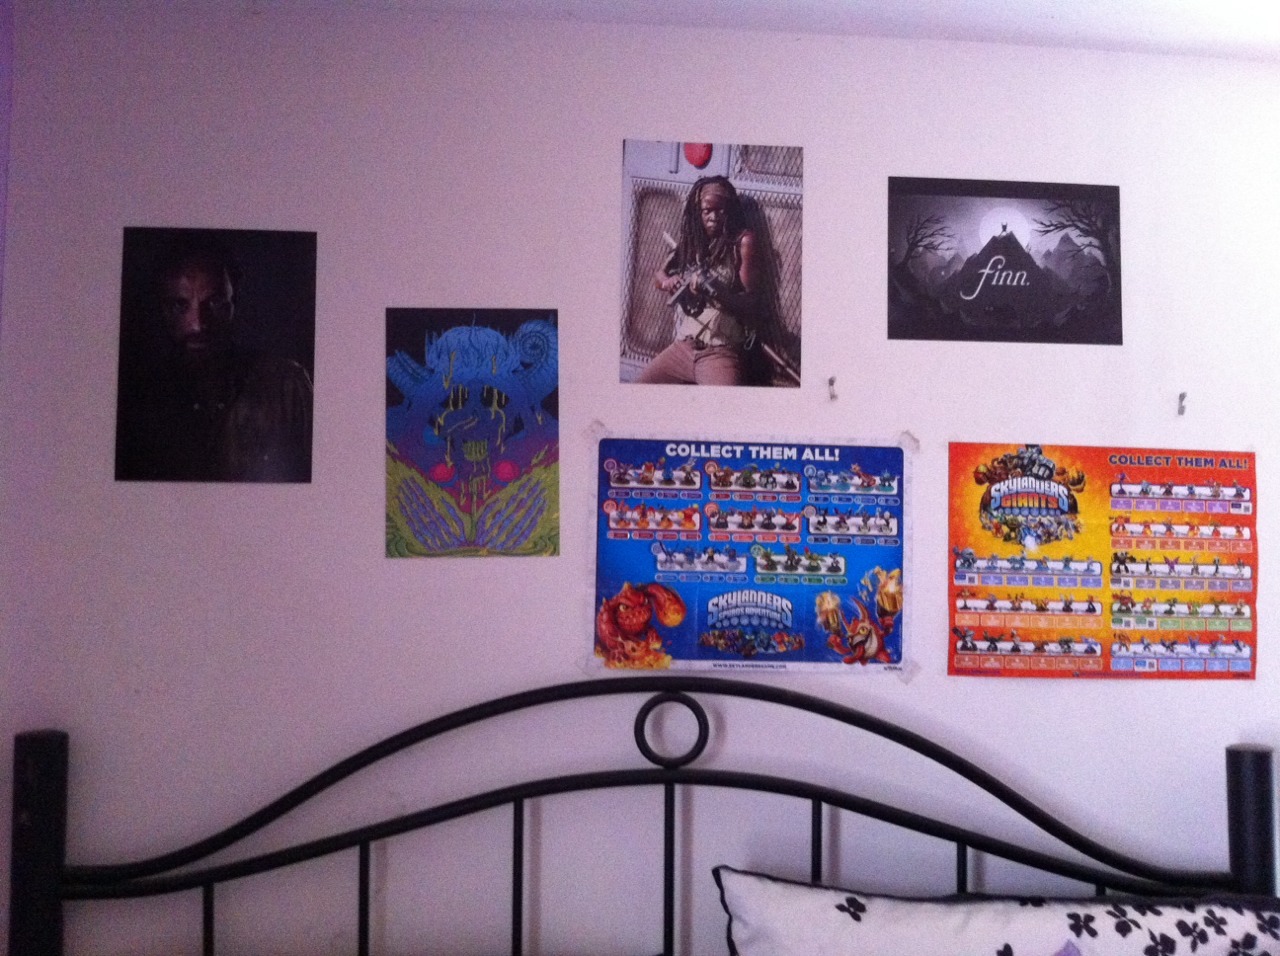 Put up some Walking Dead and Adventure Time posters and cleaned my room up a bit